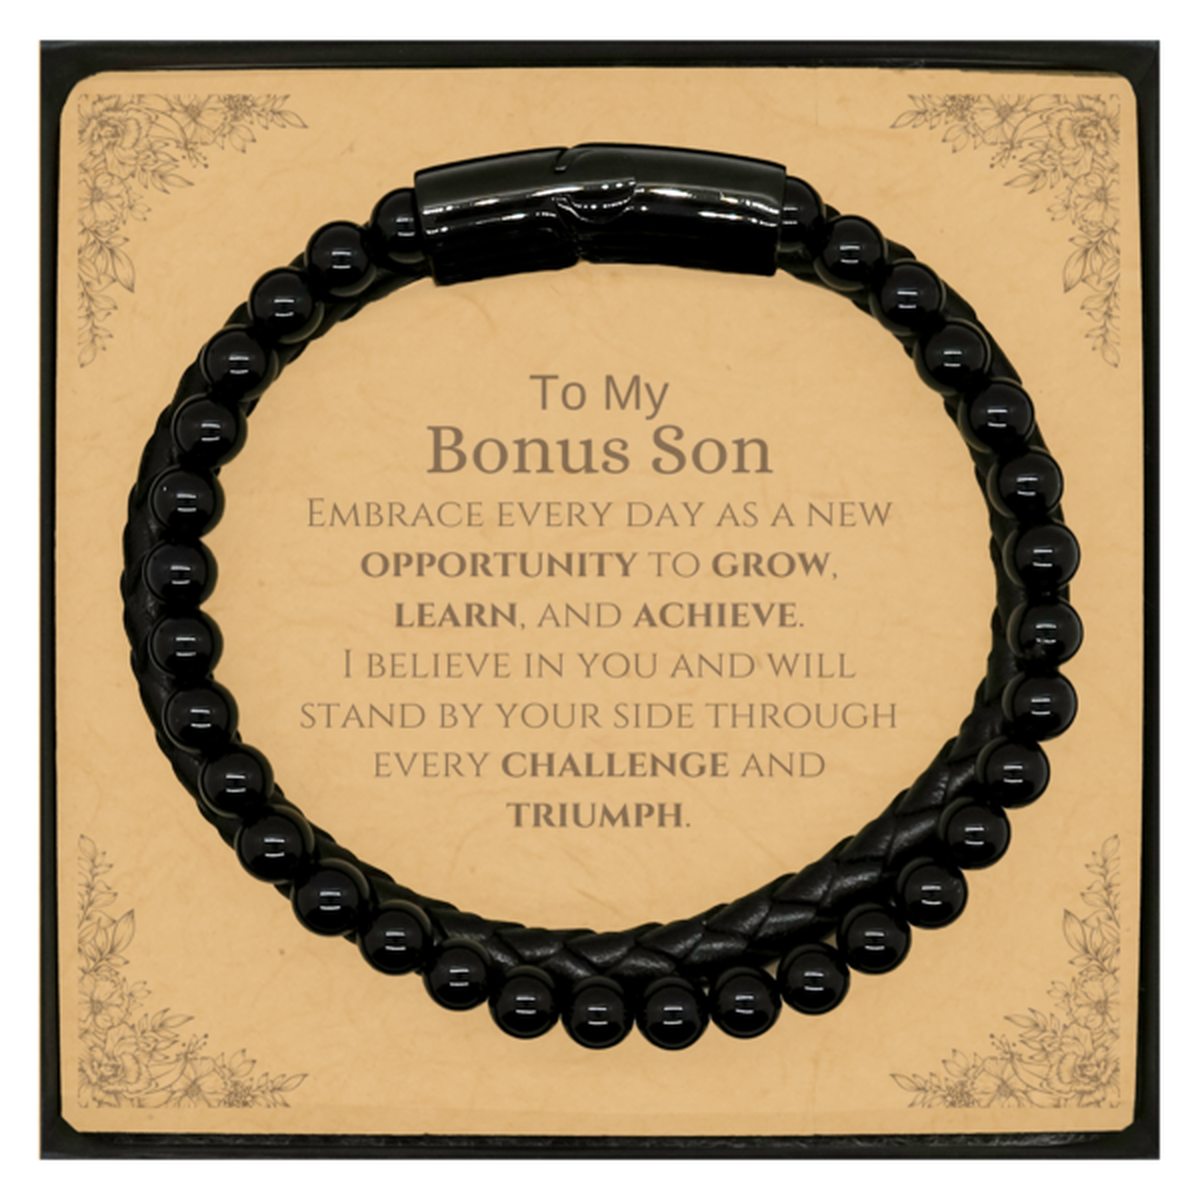 To My Bonus Son Gifts, I believe in you and will stand by your side, Inspirational Stone Leather Bracelets For Bonus Son, Birthday Christmas Motivational Bonus Son Gifts